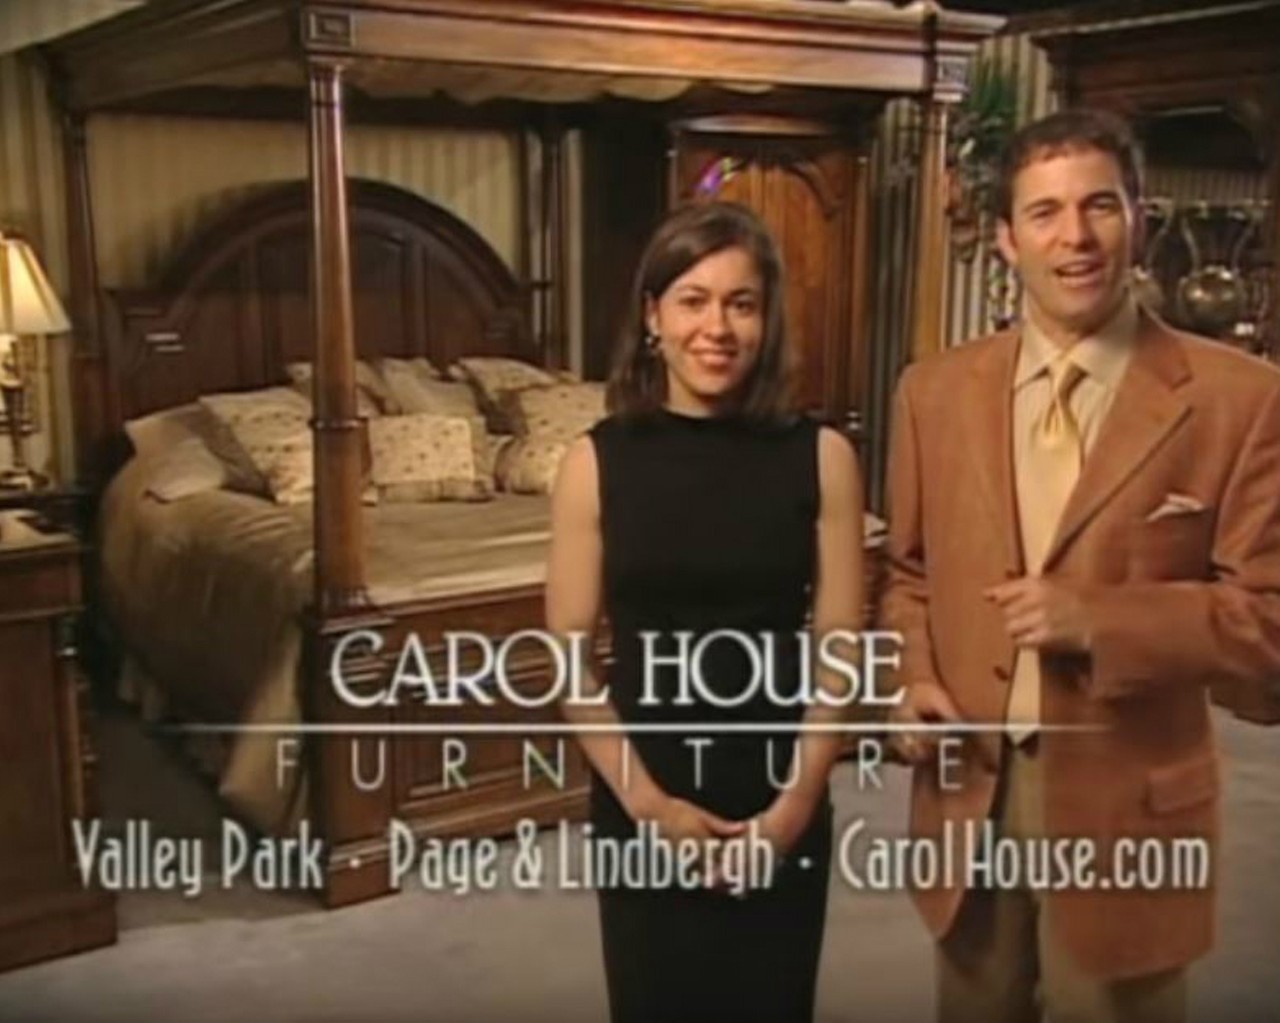 Carol House
Brook and Amy Dubman were advertised as sibling partners and rivals, but they always seemed to come together when it was time to give you a deal. And they taught us to go to Carol House: "Because you like nice things."
Photo courtesy of YouTube